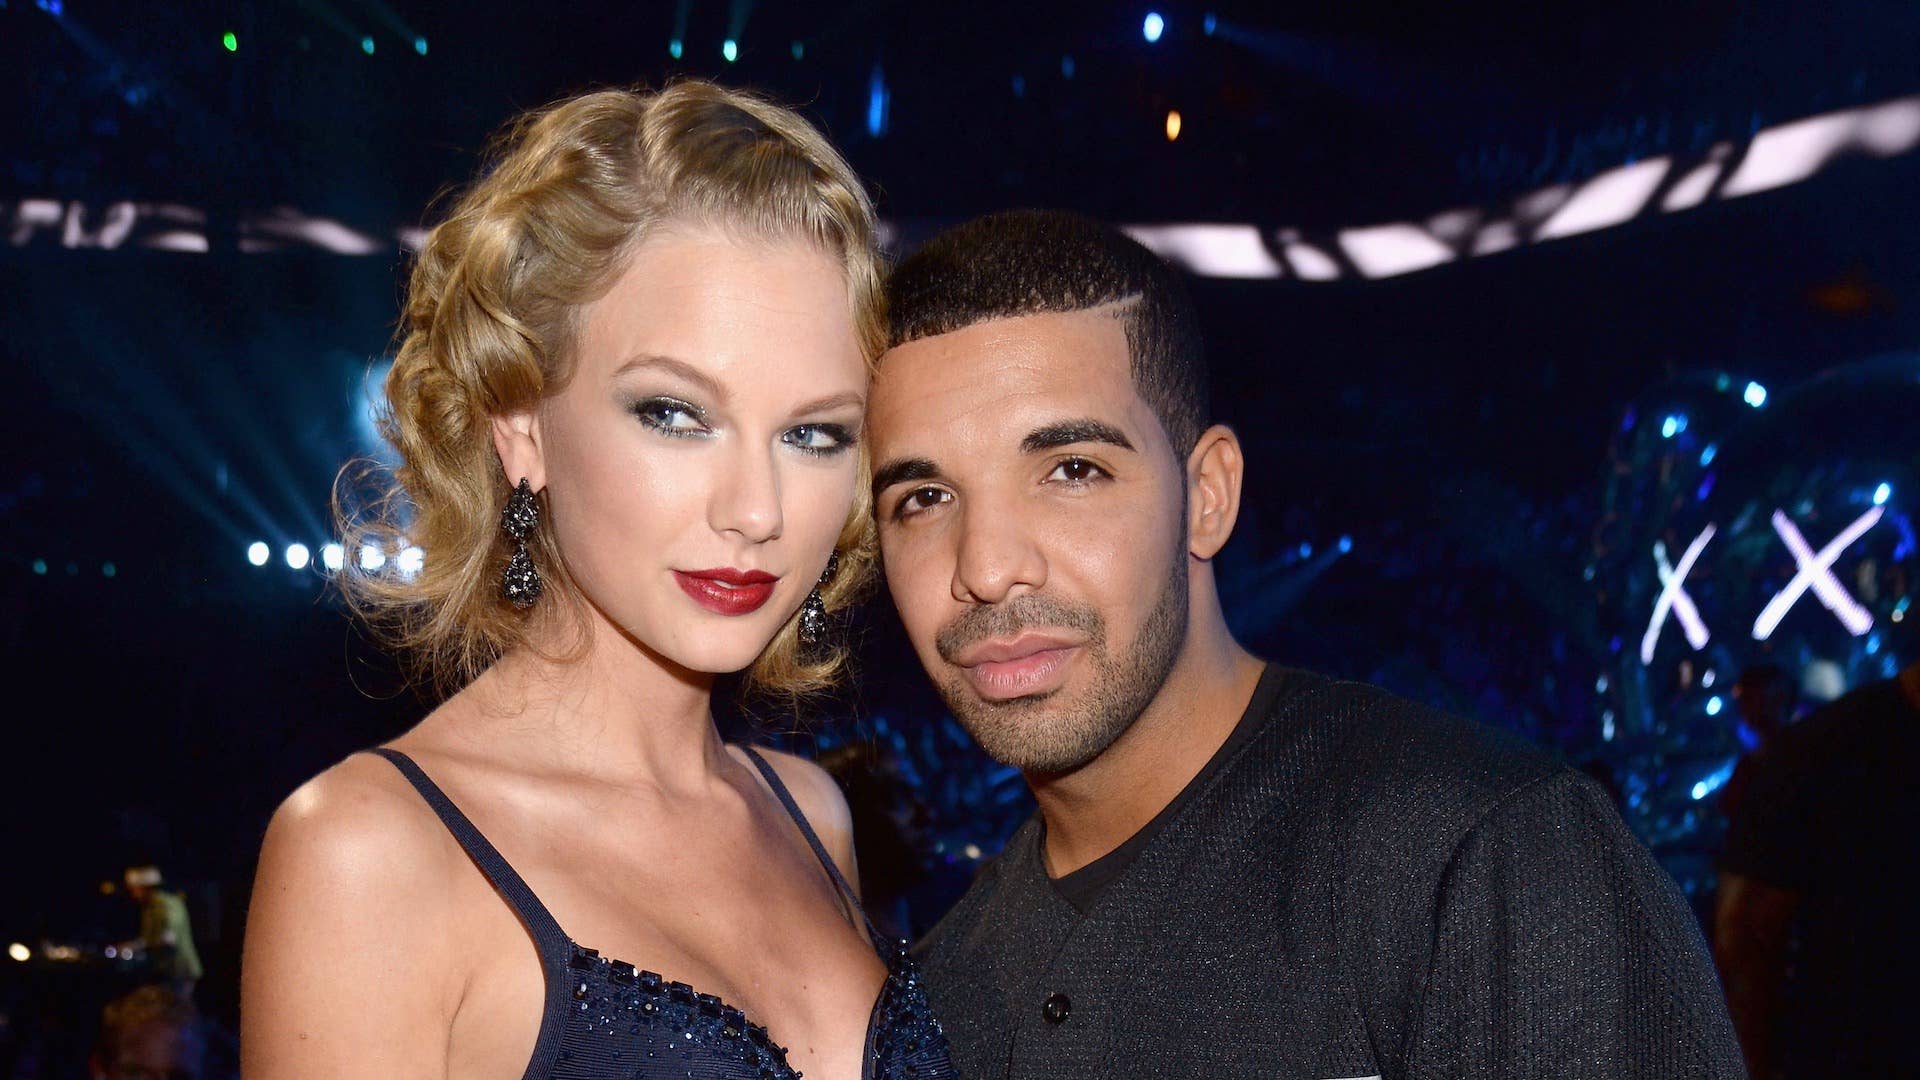 Taylor Swift (Detail: Herve Leger dress) and Drake attend the 2013 MTV Video Music Awards